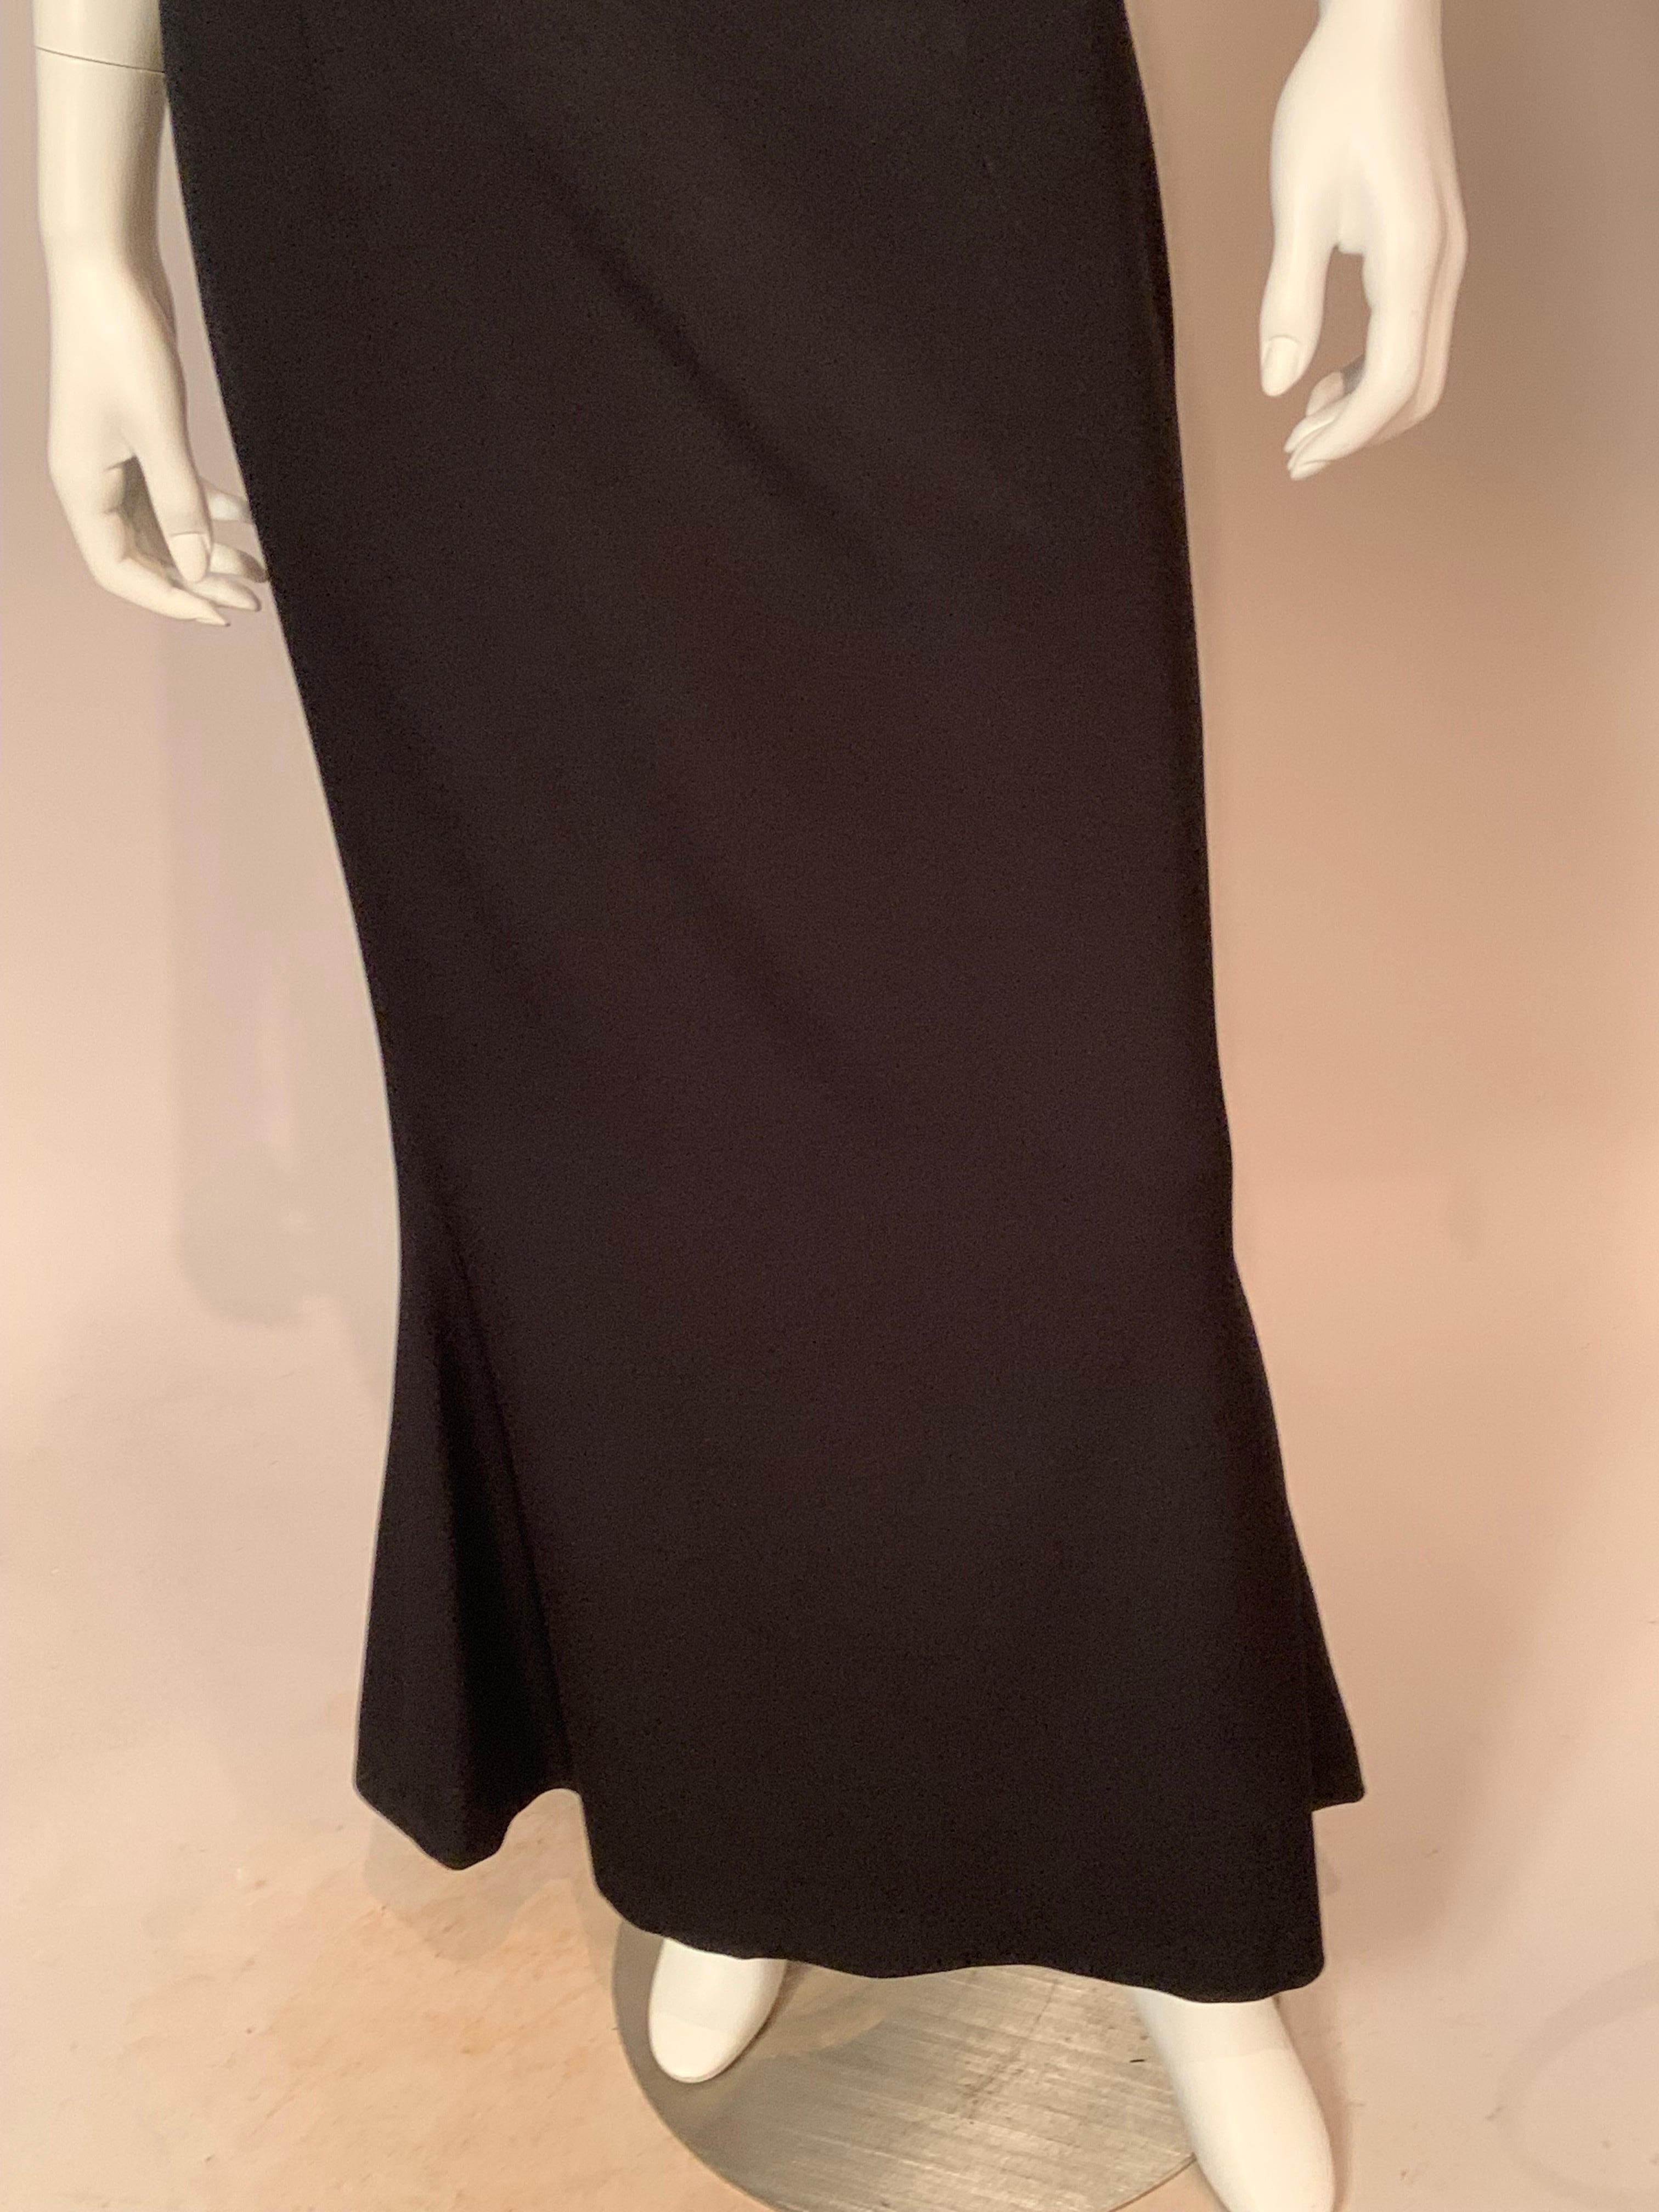 Carolina Herrera Strapless Black Silk Evening Dress In Excellent Condition For Sale In New Hope, PA